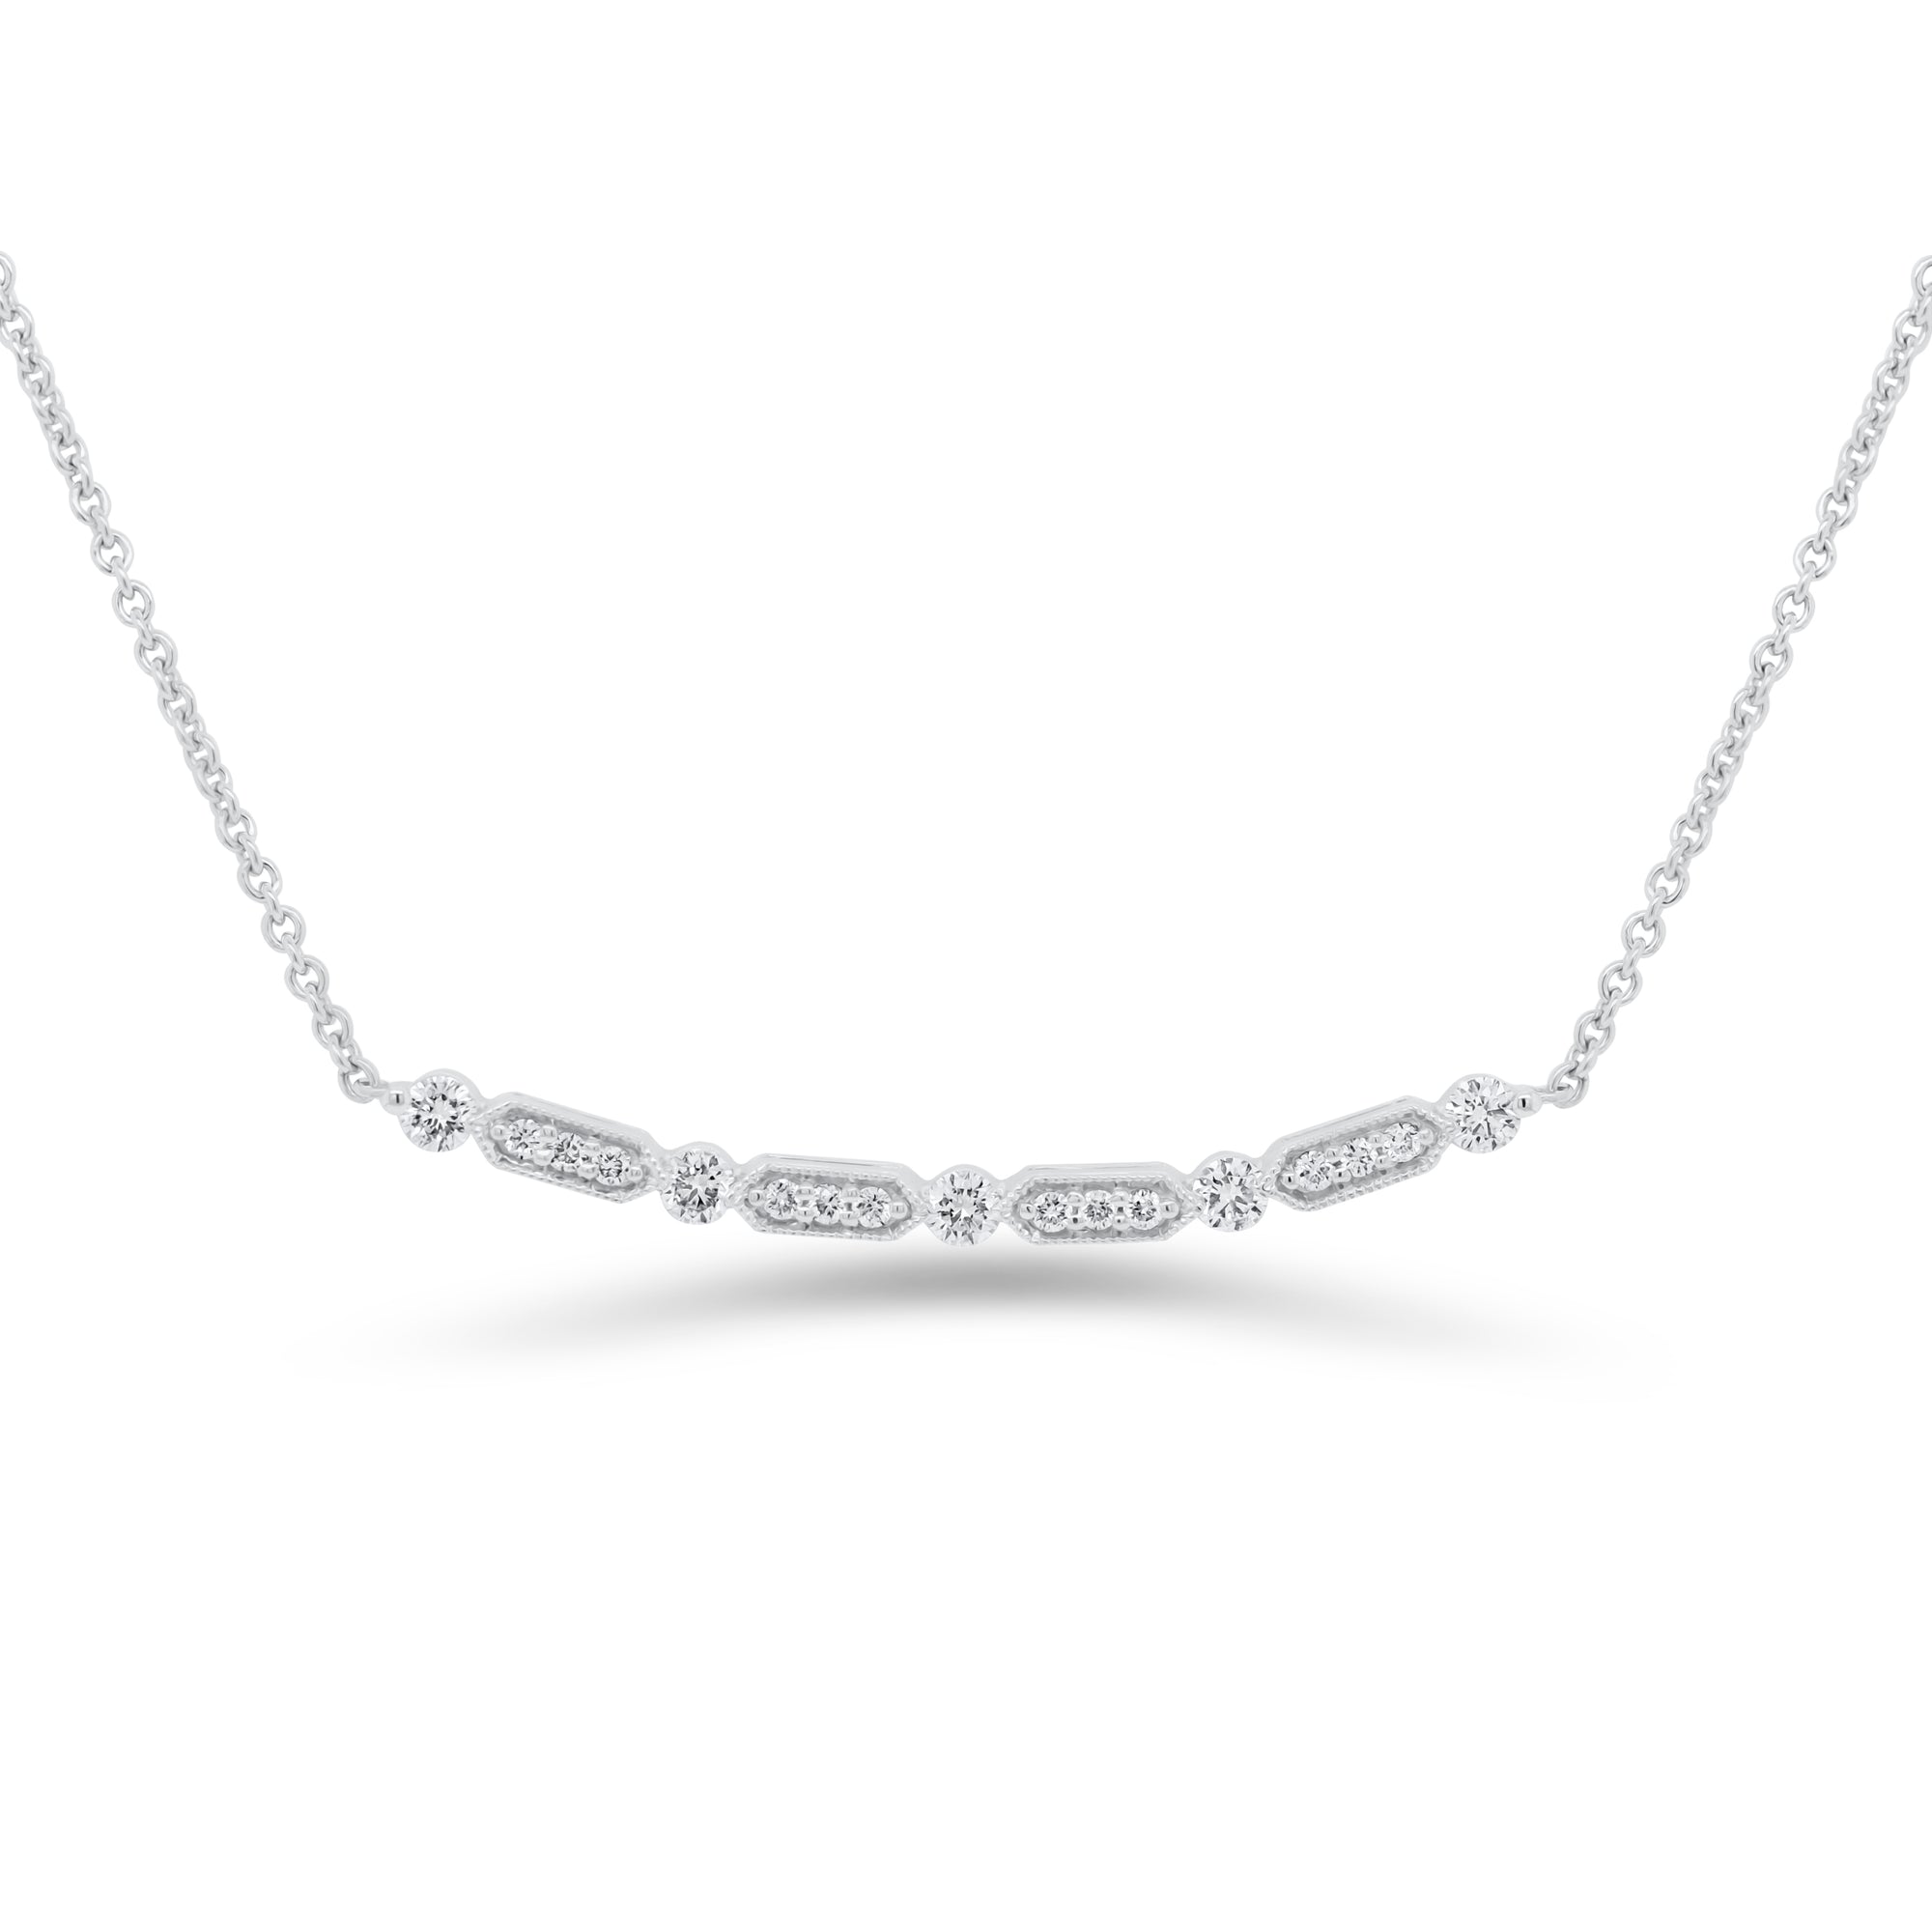 Diamond Bar Station Necklace - 18K white gold weighing 3.75 grams - 5 round diamonds totaling 0.23 carats - 12 round diamonds totaling 0.09 carats